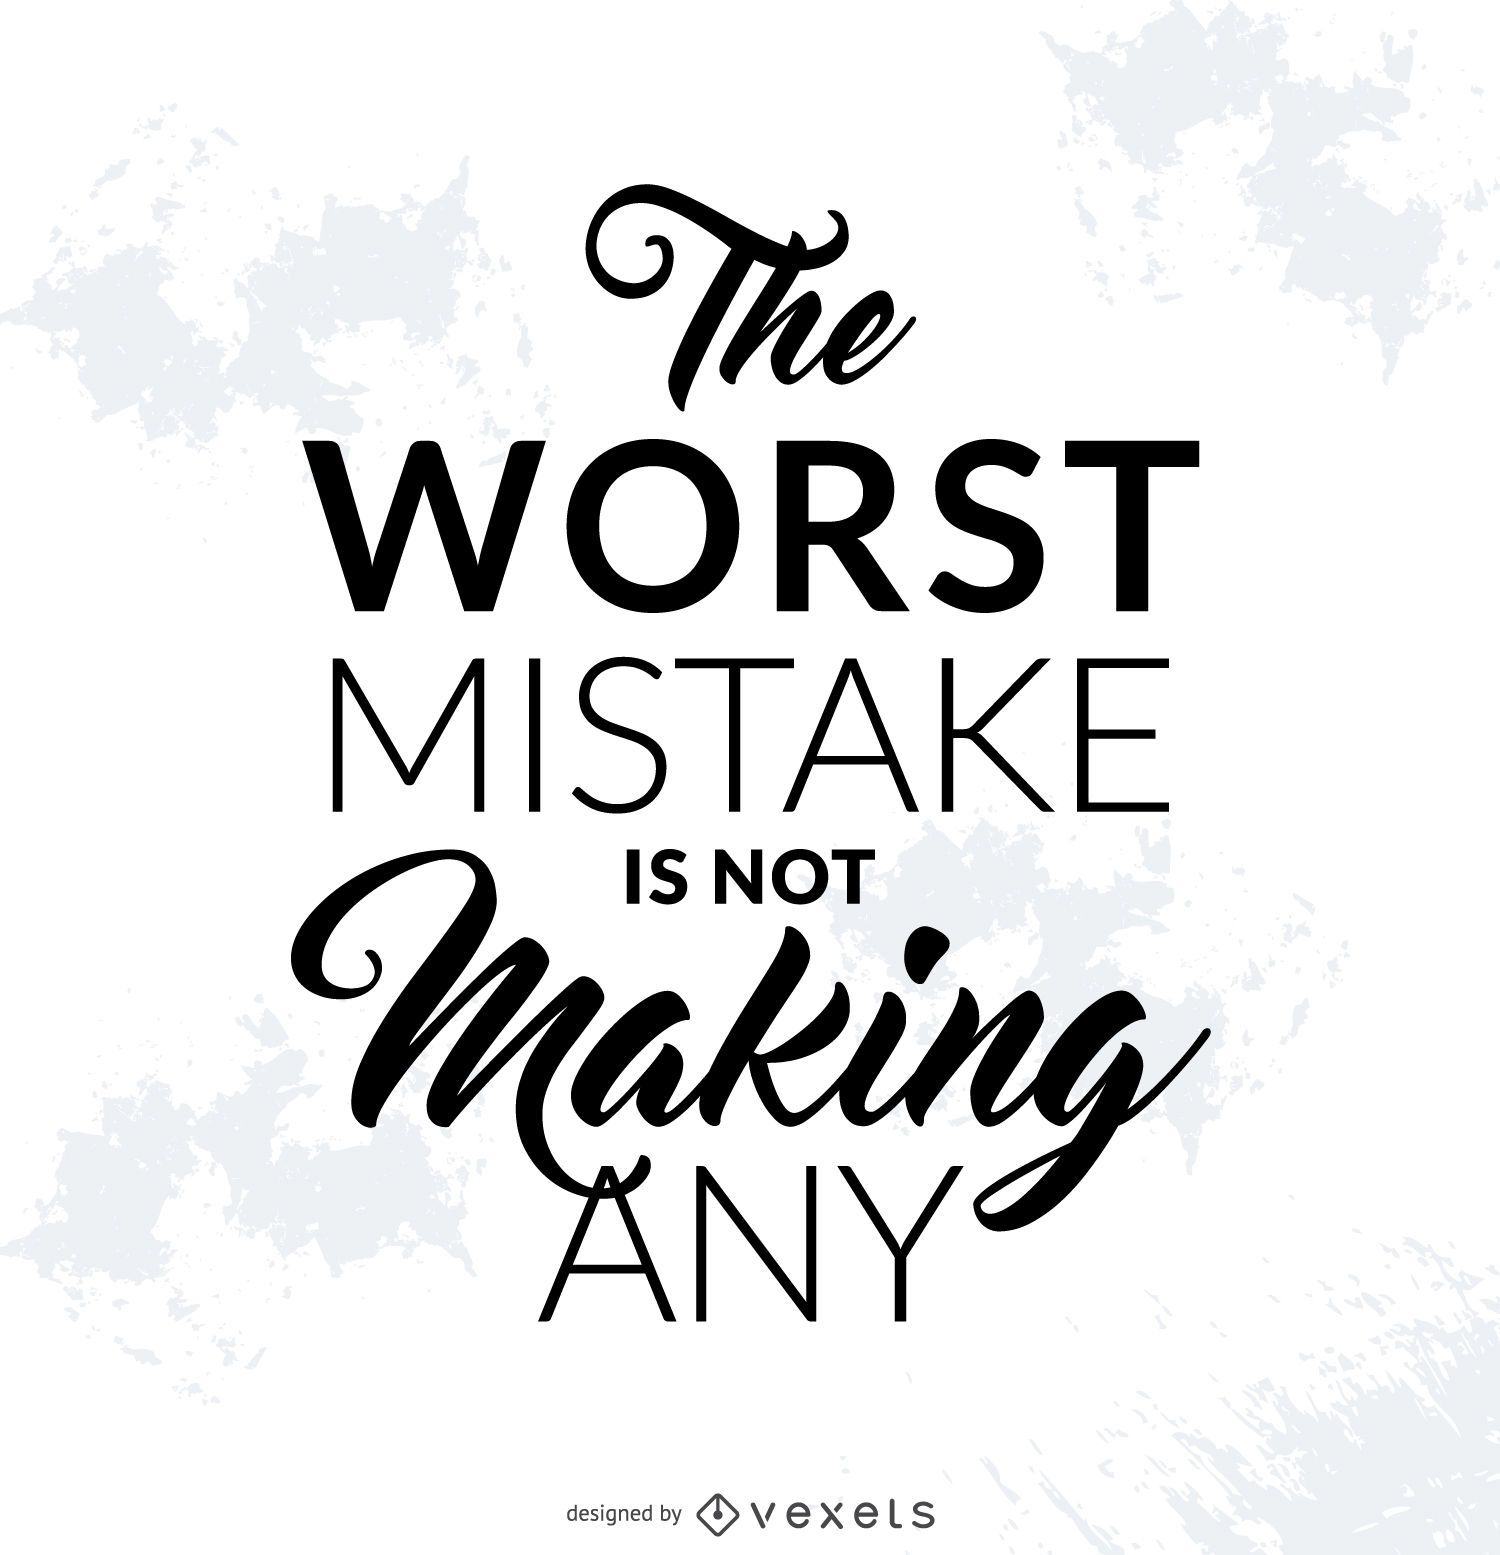 Motivational mistake quote design